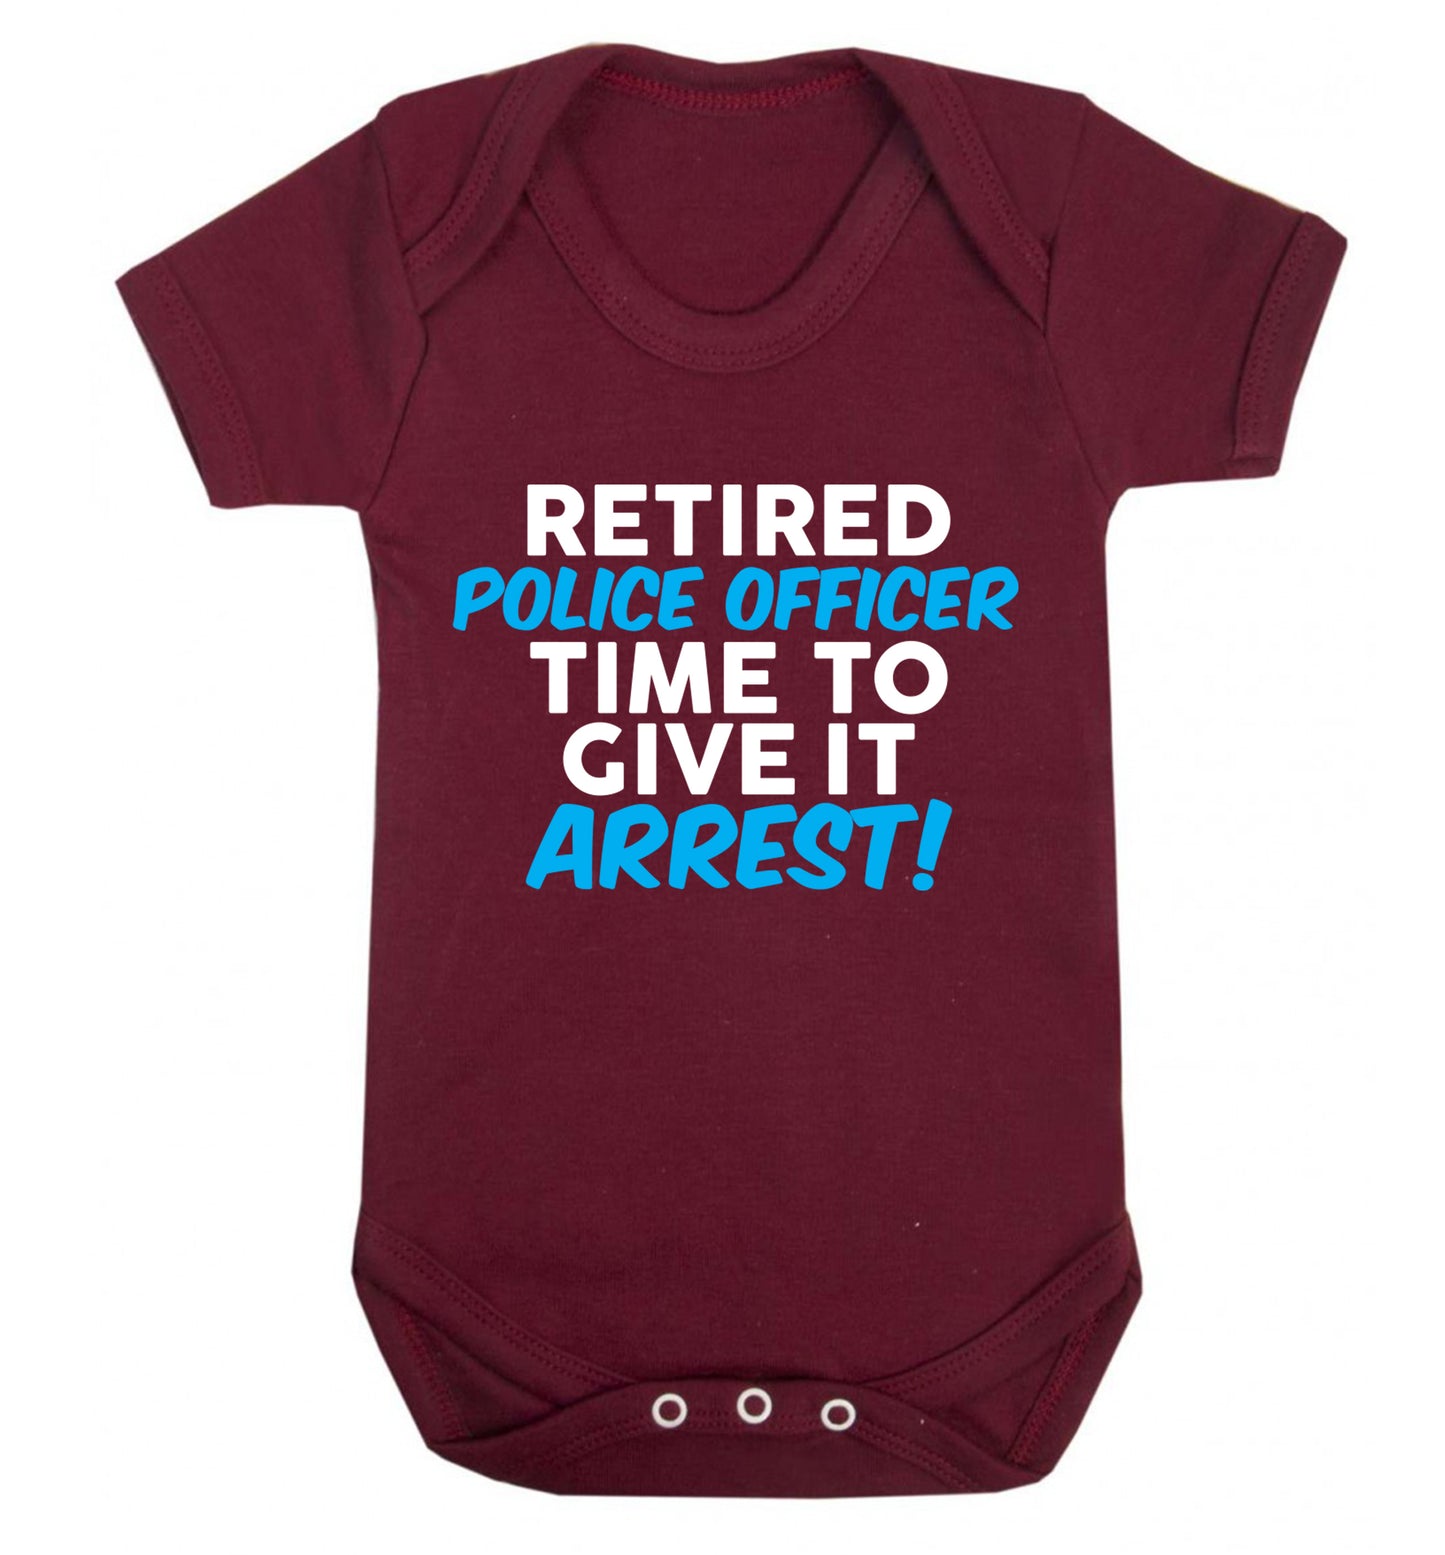 Retired police officer time to give it arrest Baby Vest maroon 18-24 months